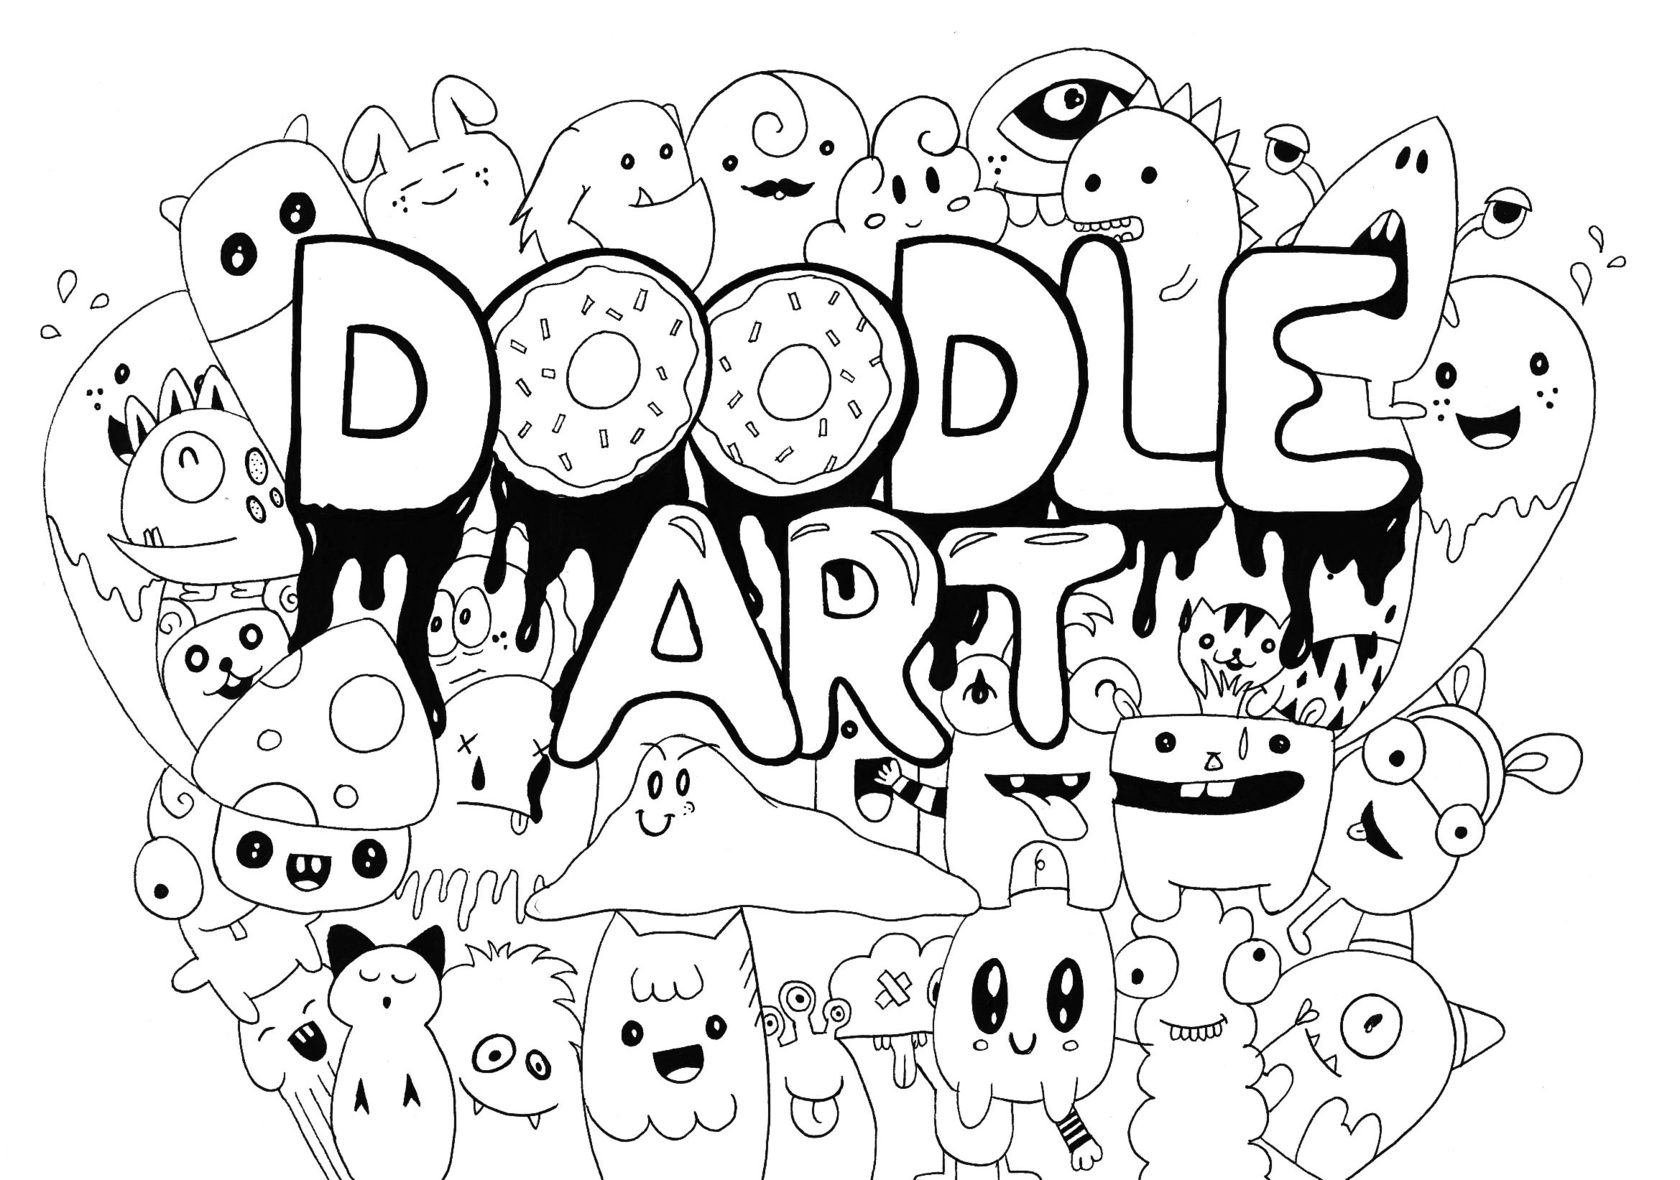 What are DOODLE Videos?